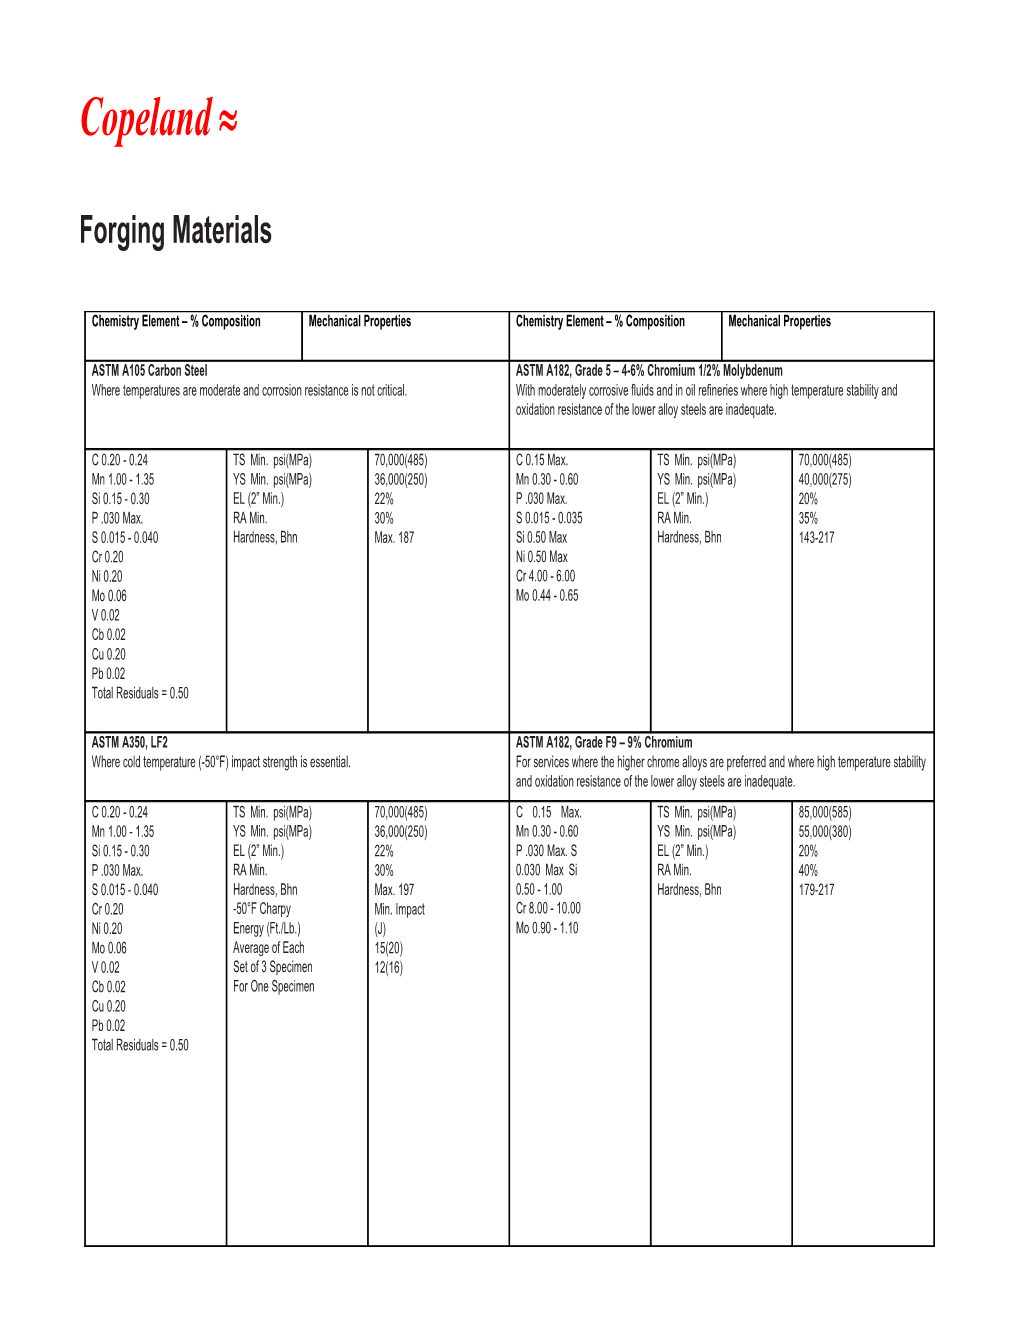 Cross-Reference Ofastm Material Specifications